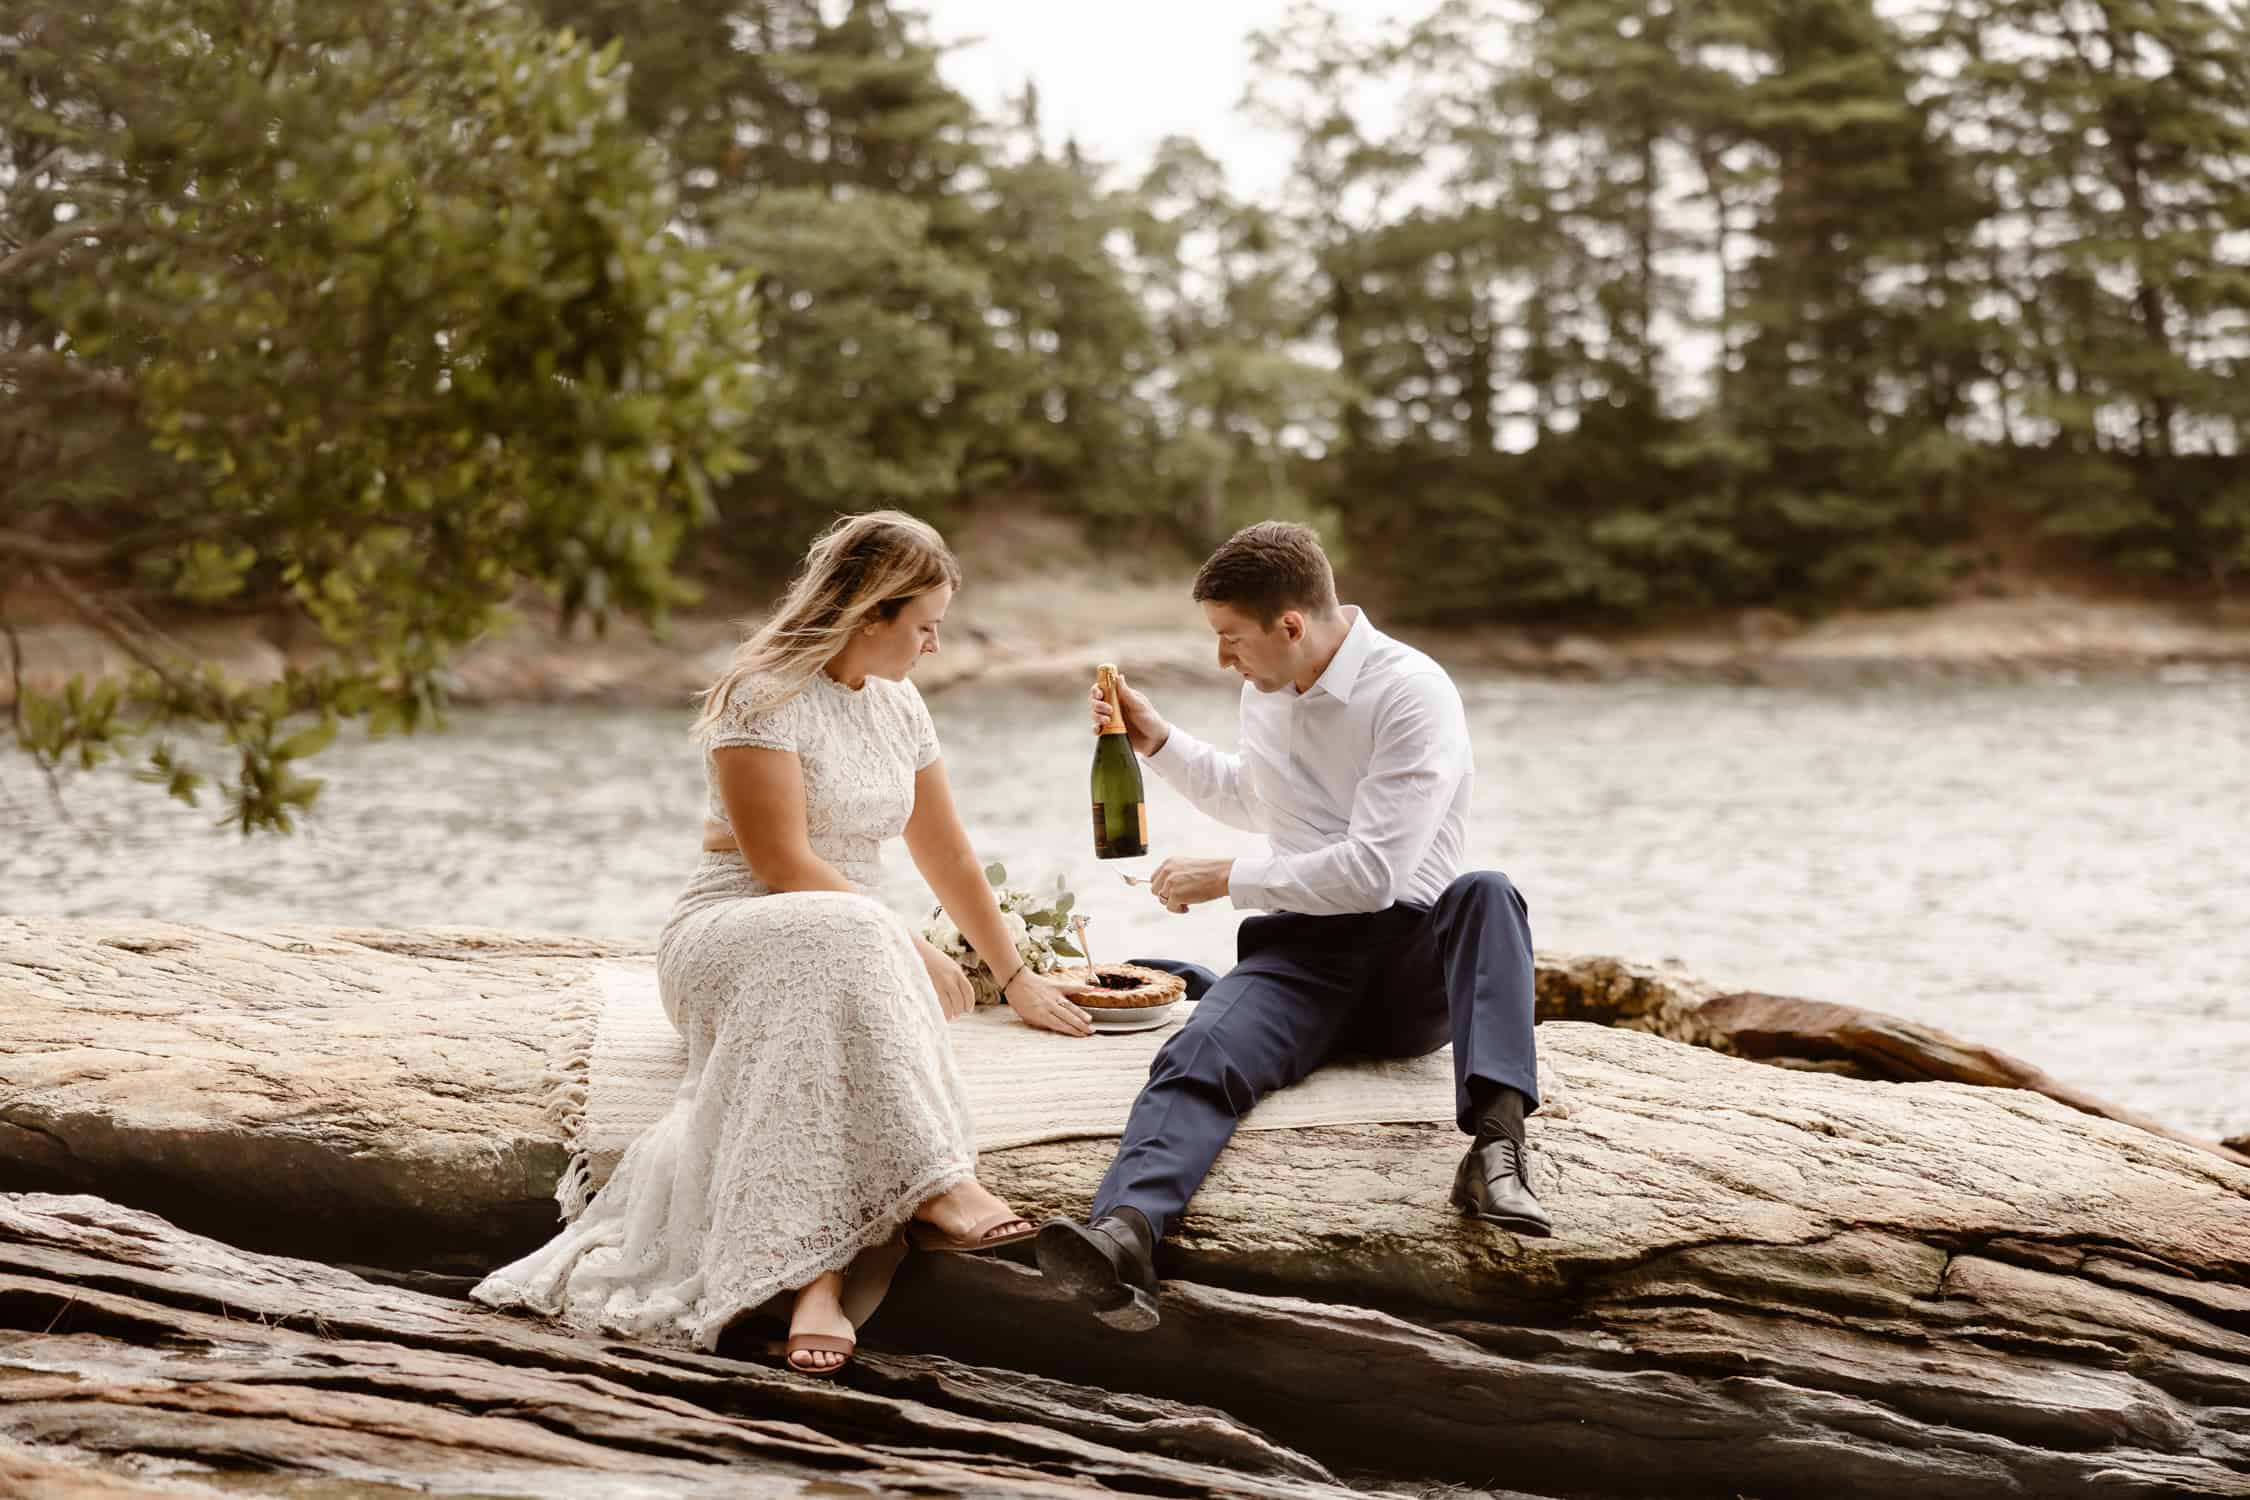 A couple celebrating eloping in Freeport with a champagne bottle and a pie.